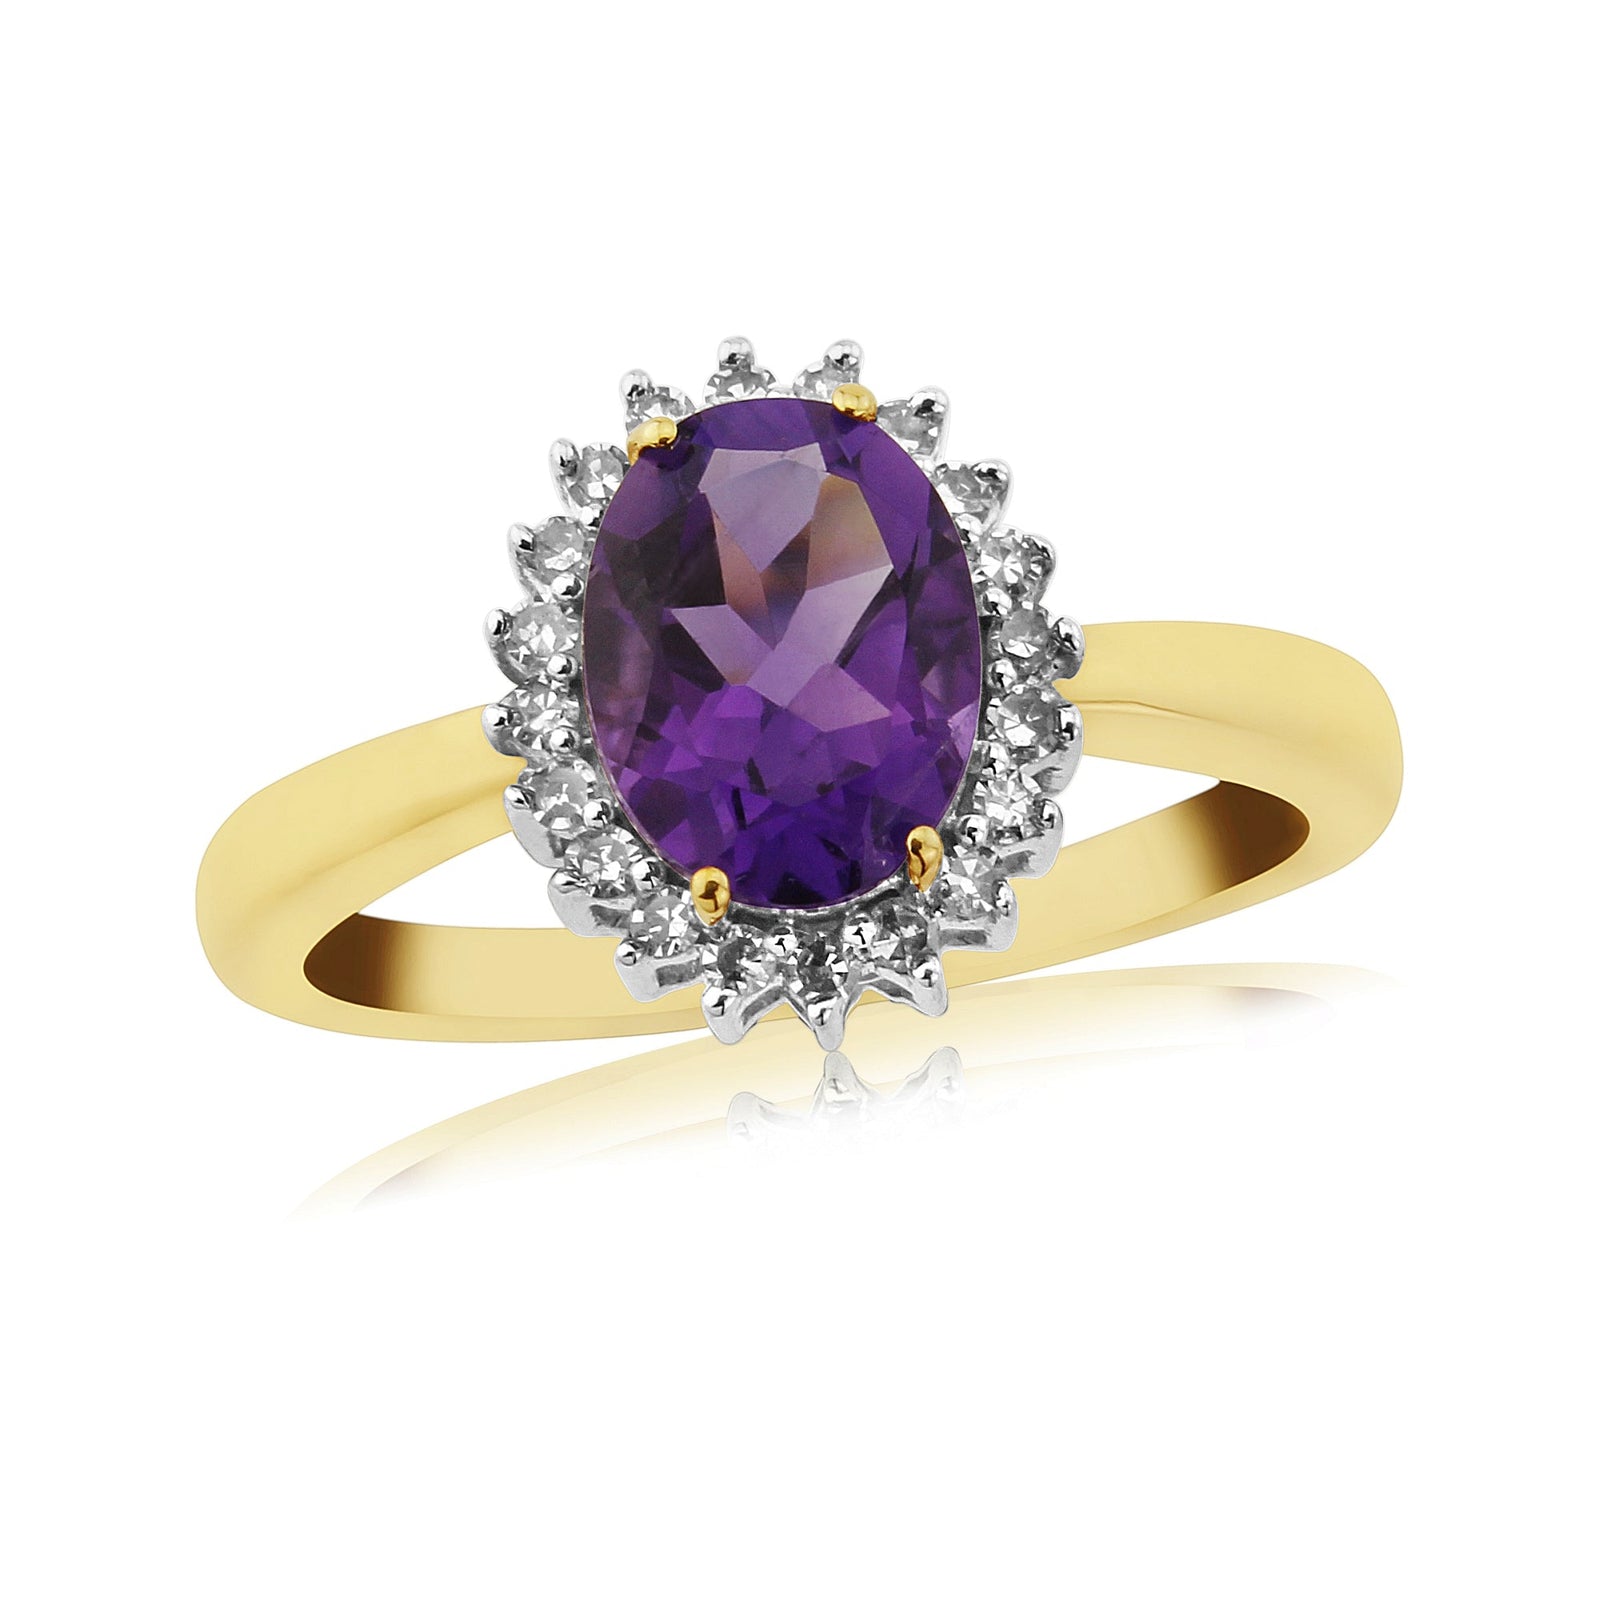 9ct gold 8x6mm oval amethyst & diamond cluster ring 0.15ct